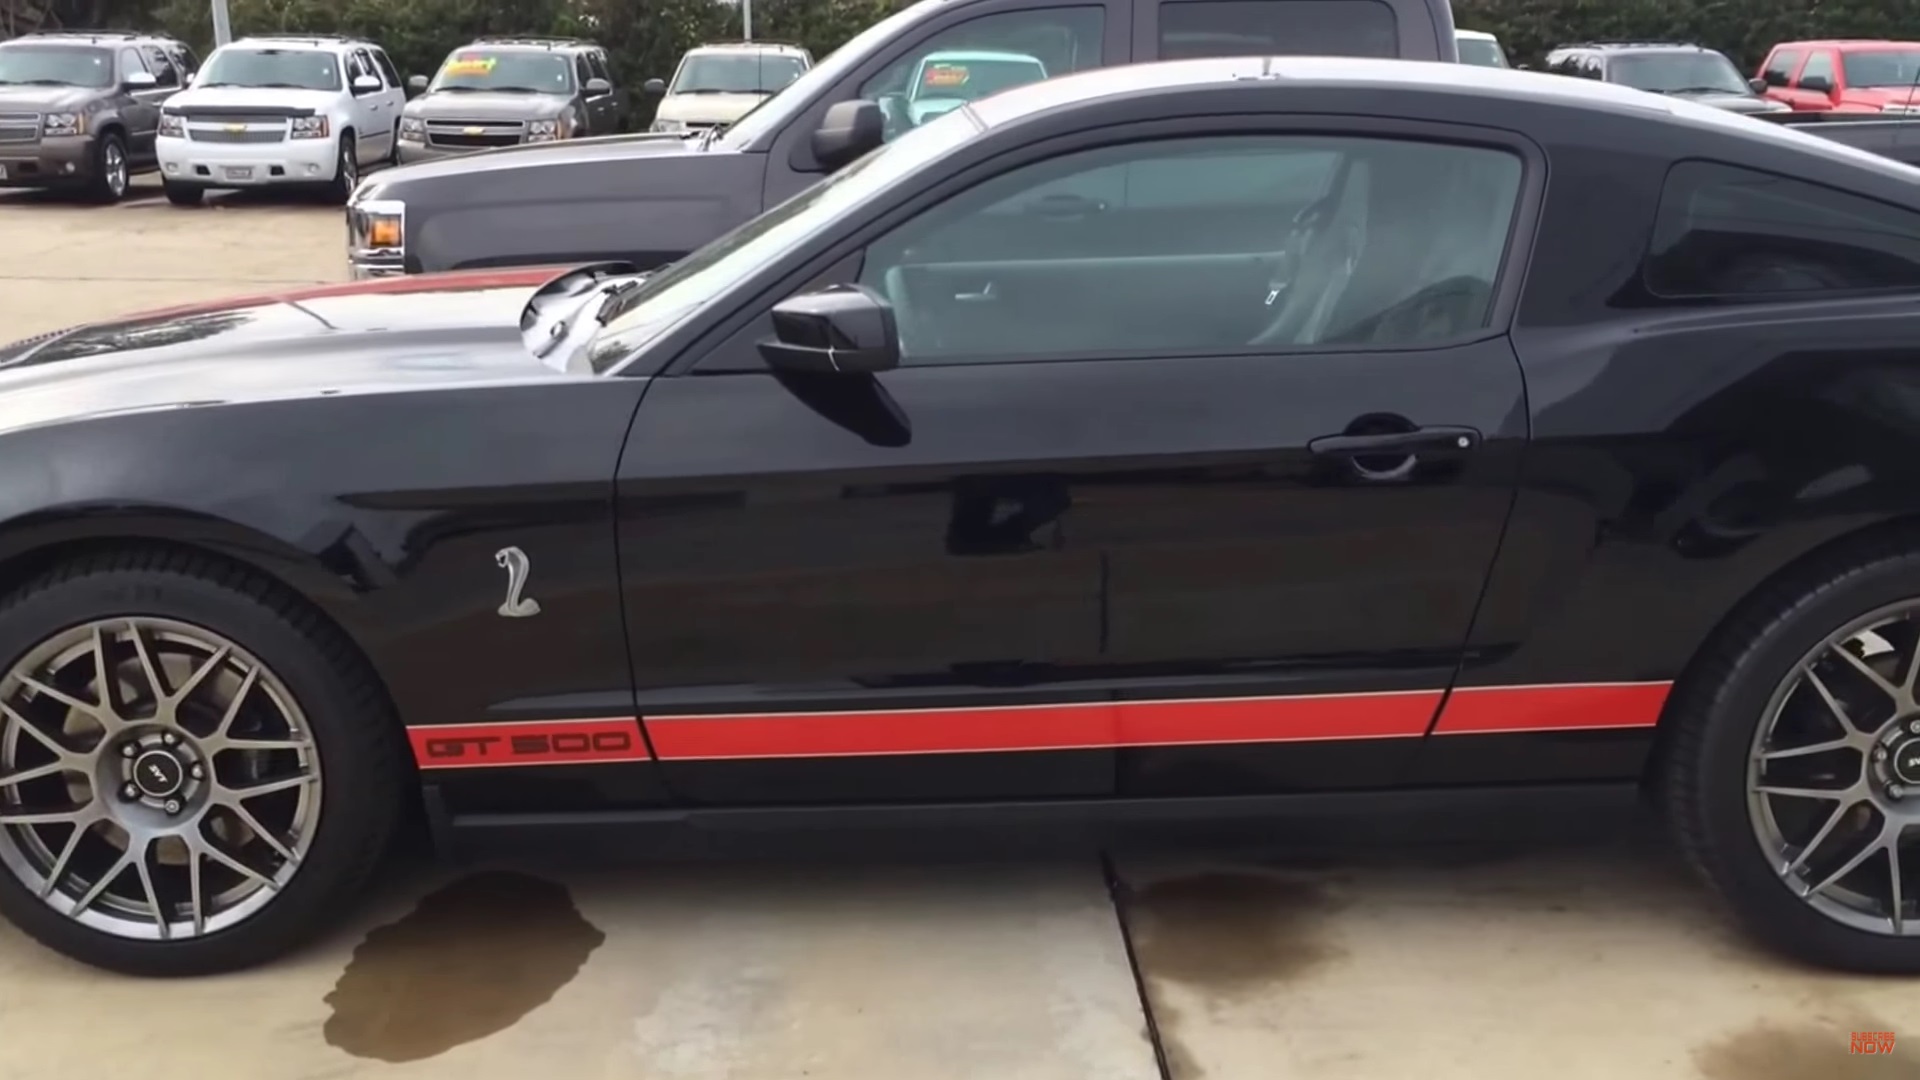 Video: 2012 Ford Mustang Shelby GT500 Startup + Exhaust Sound